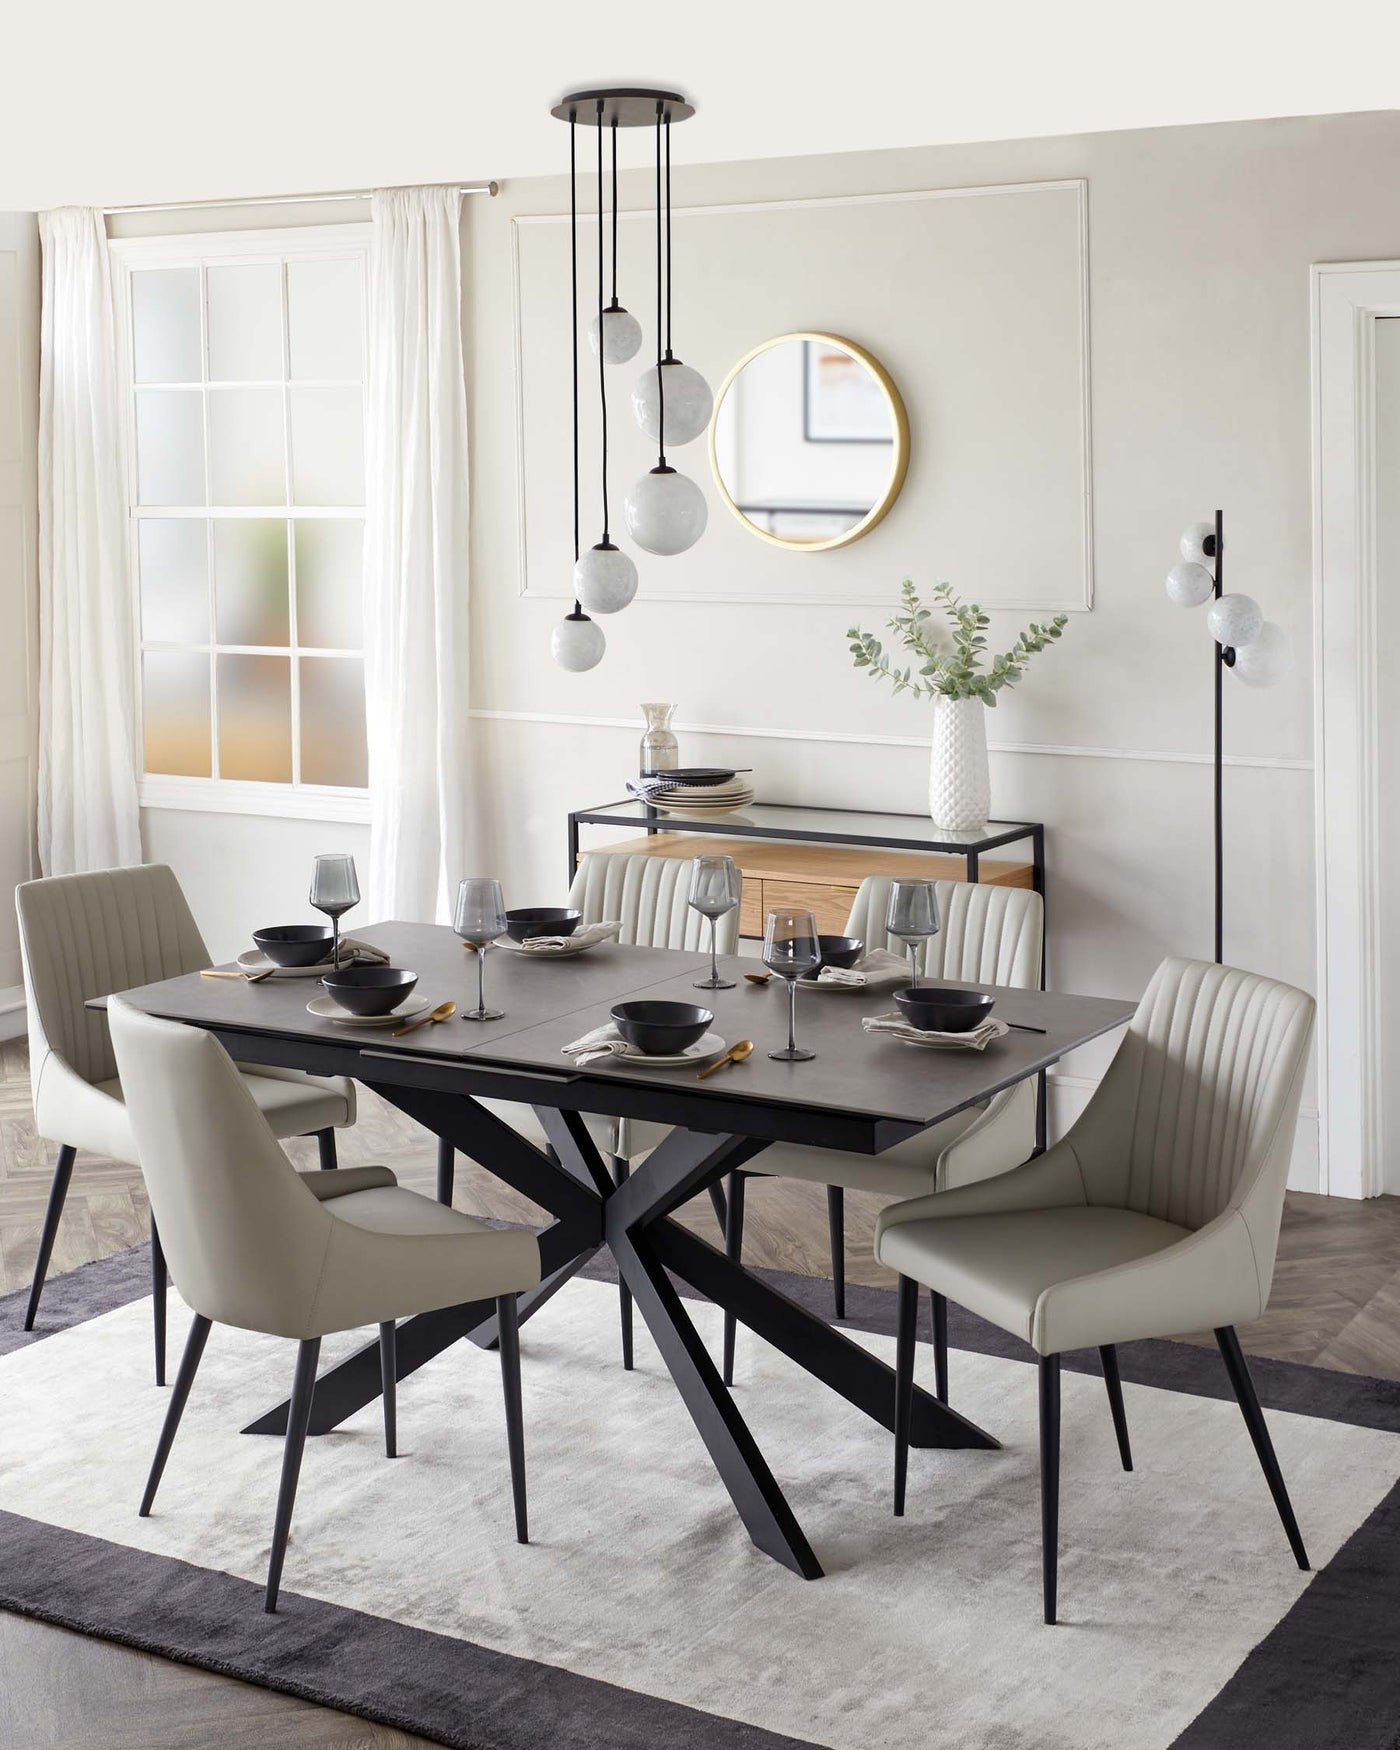 Modern dining room set featuring a rectangular black table with a unique, angular black base design. The table is surrounded by six beige upholstered chairs with vertical channel tufting on the backrests and slim black legs. A simple black sideboard is situated against the wall, accented with decorative items. The furniture is arranged on a textured grey area rug.